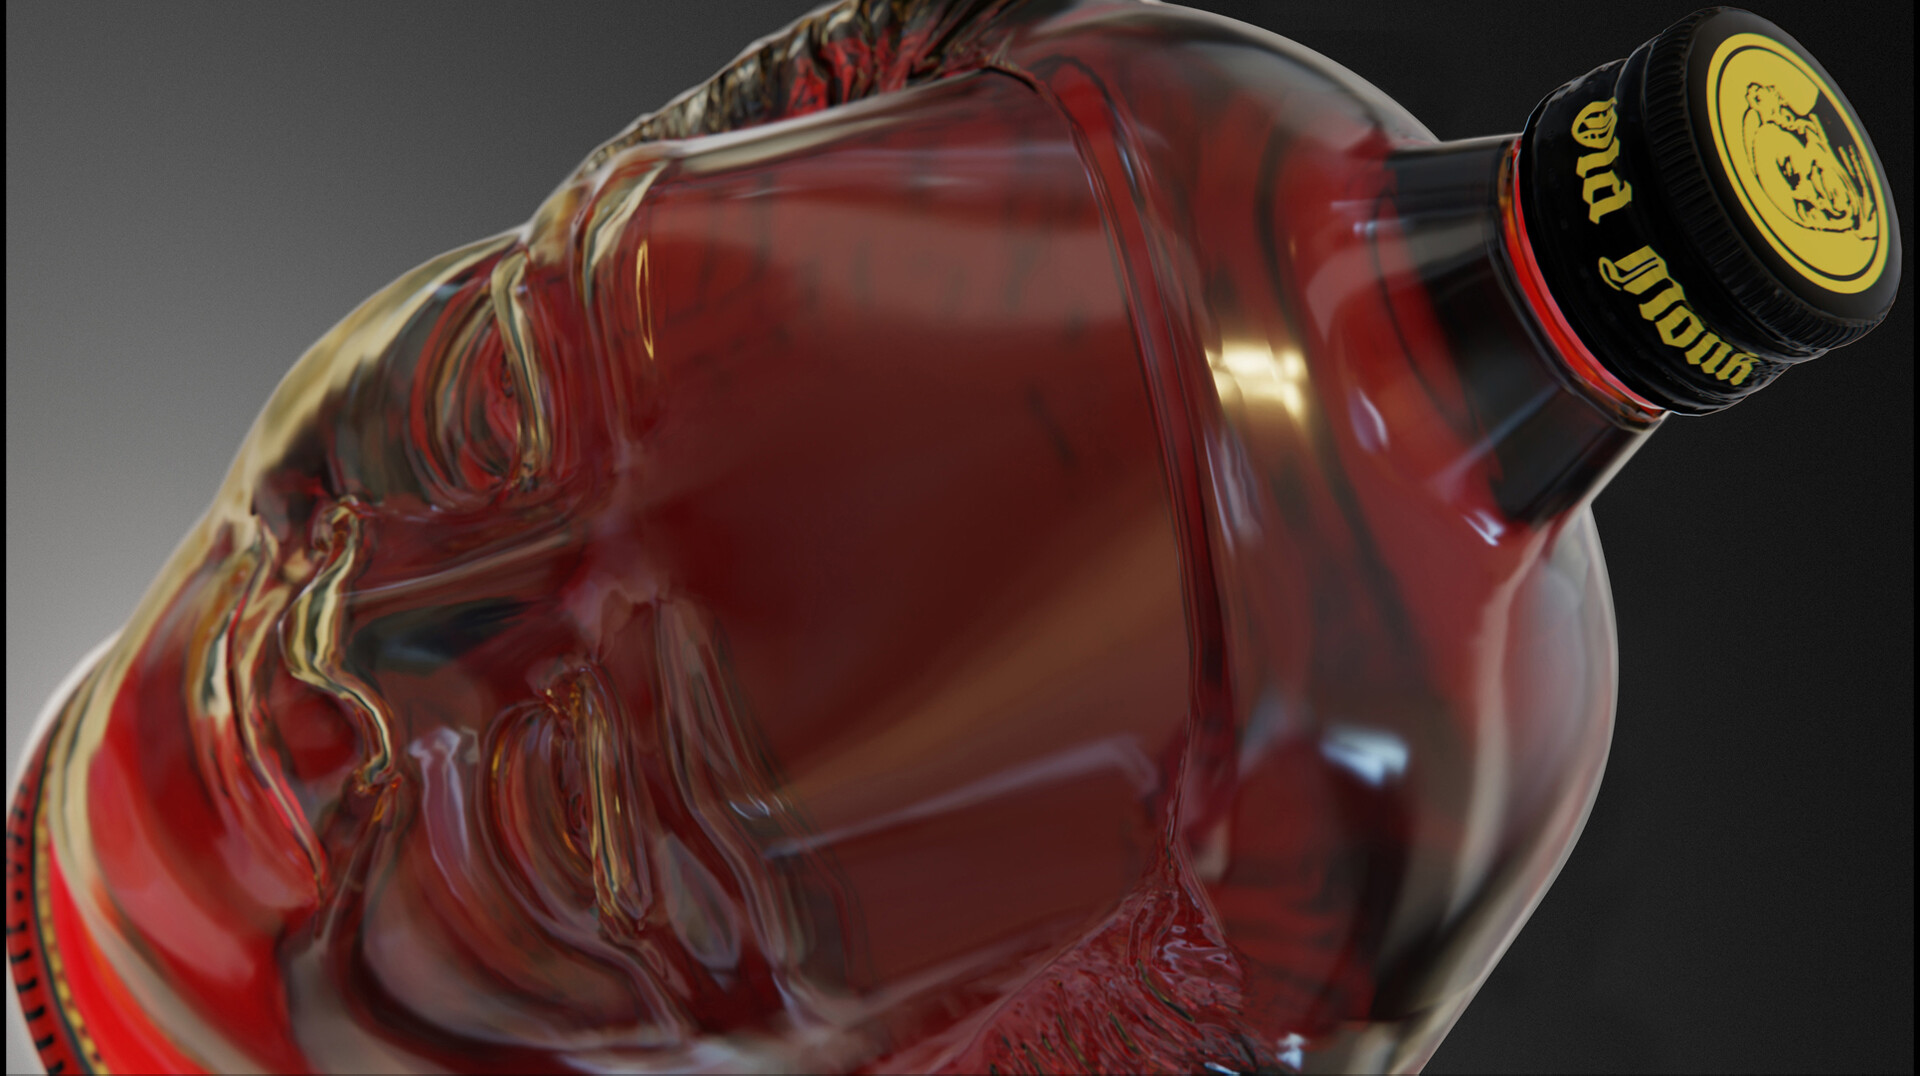 ArtStation - Old Monk The Legend Rum Very Old Vatted